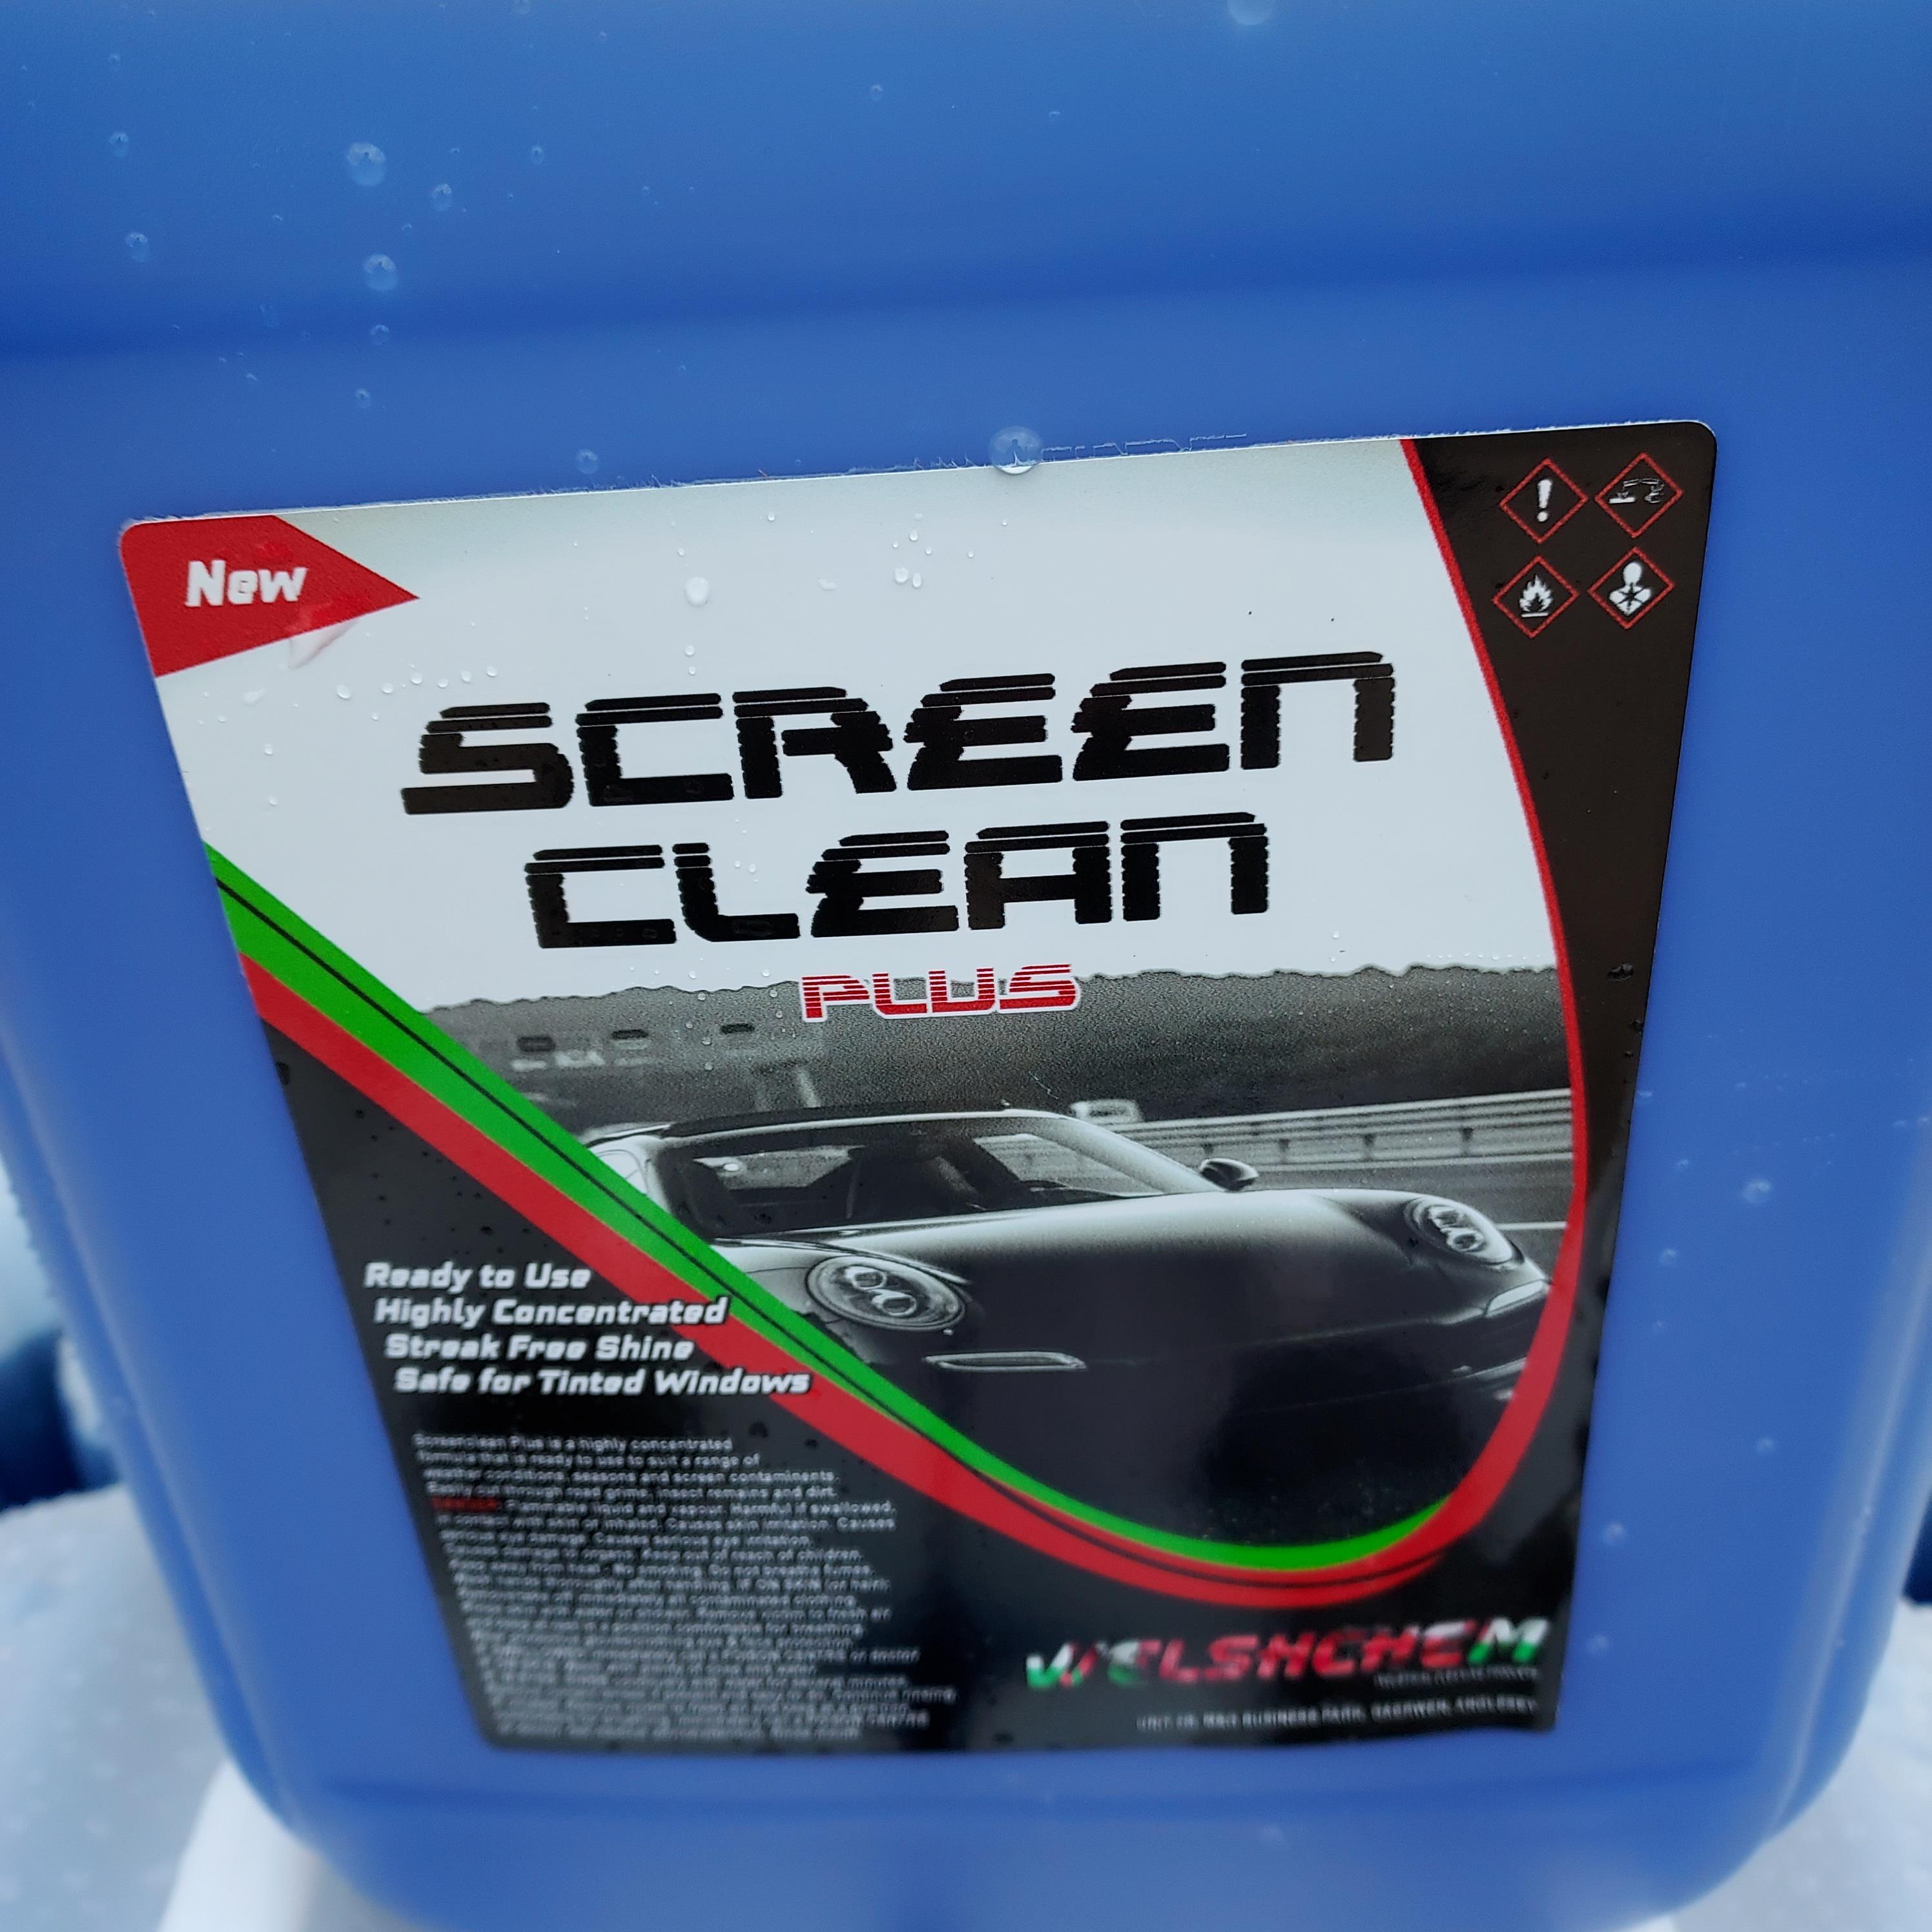 5 X BRAND NEW 10 LITRE SCREENCLEAN SUPER - HIGHLY CONCENTRATED FORMULA - STREAK FREE SHINE - SAFE - Image 2 of 2